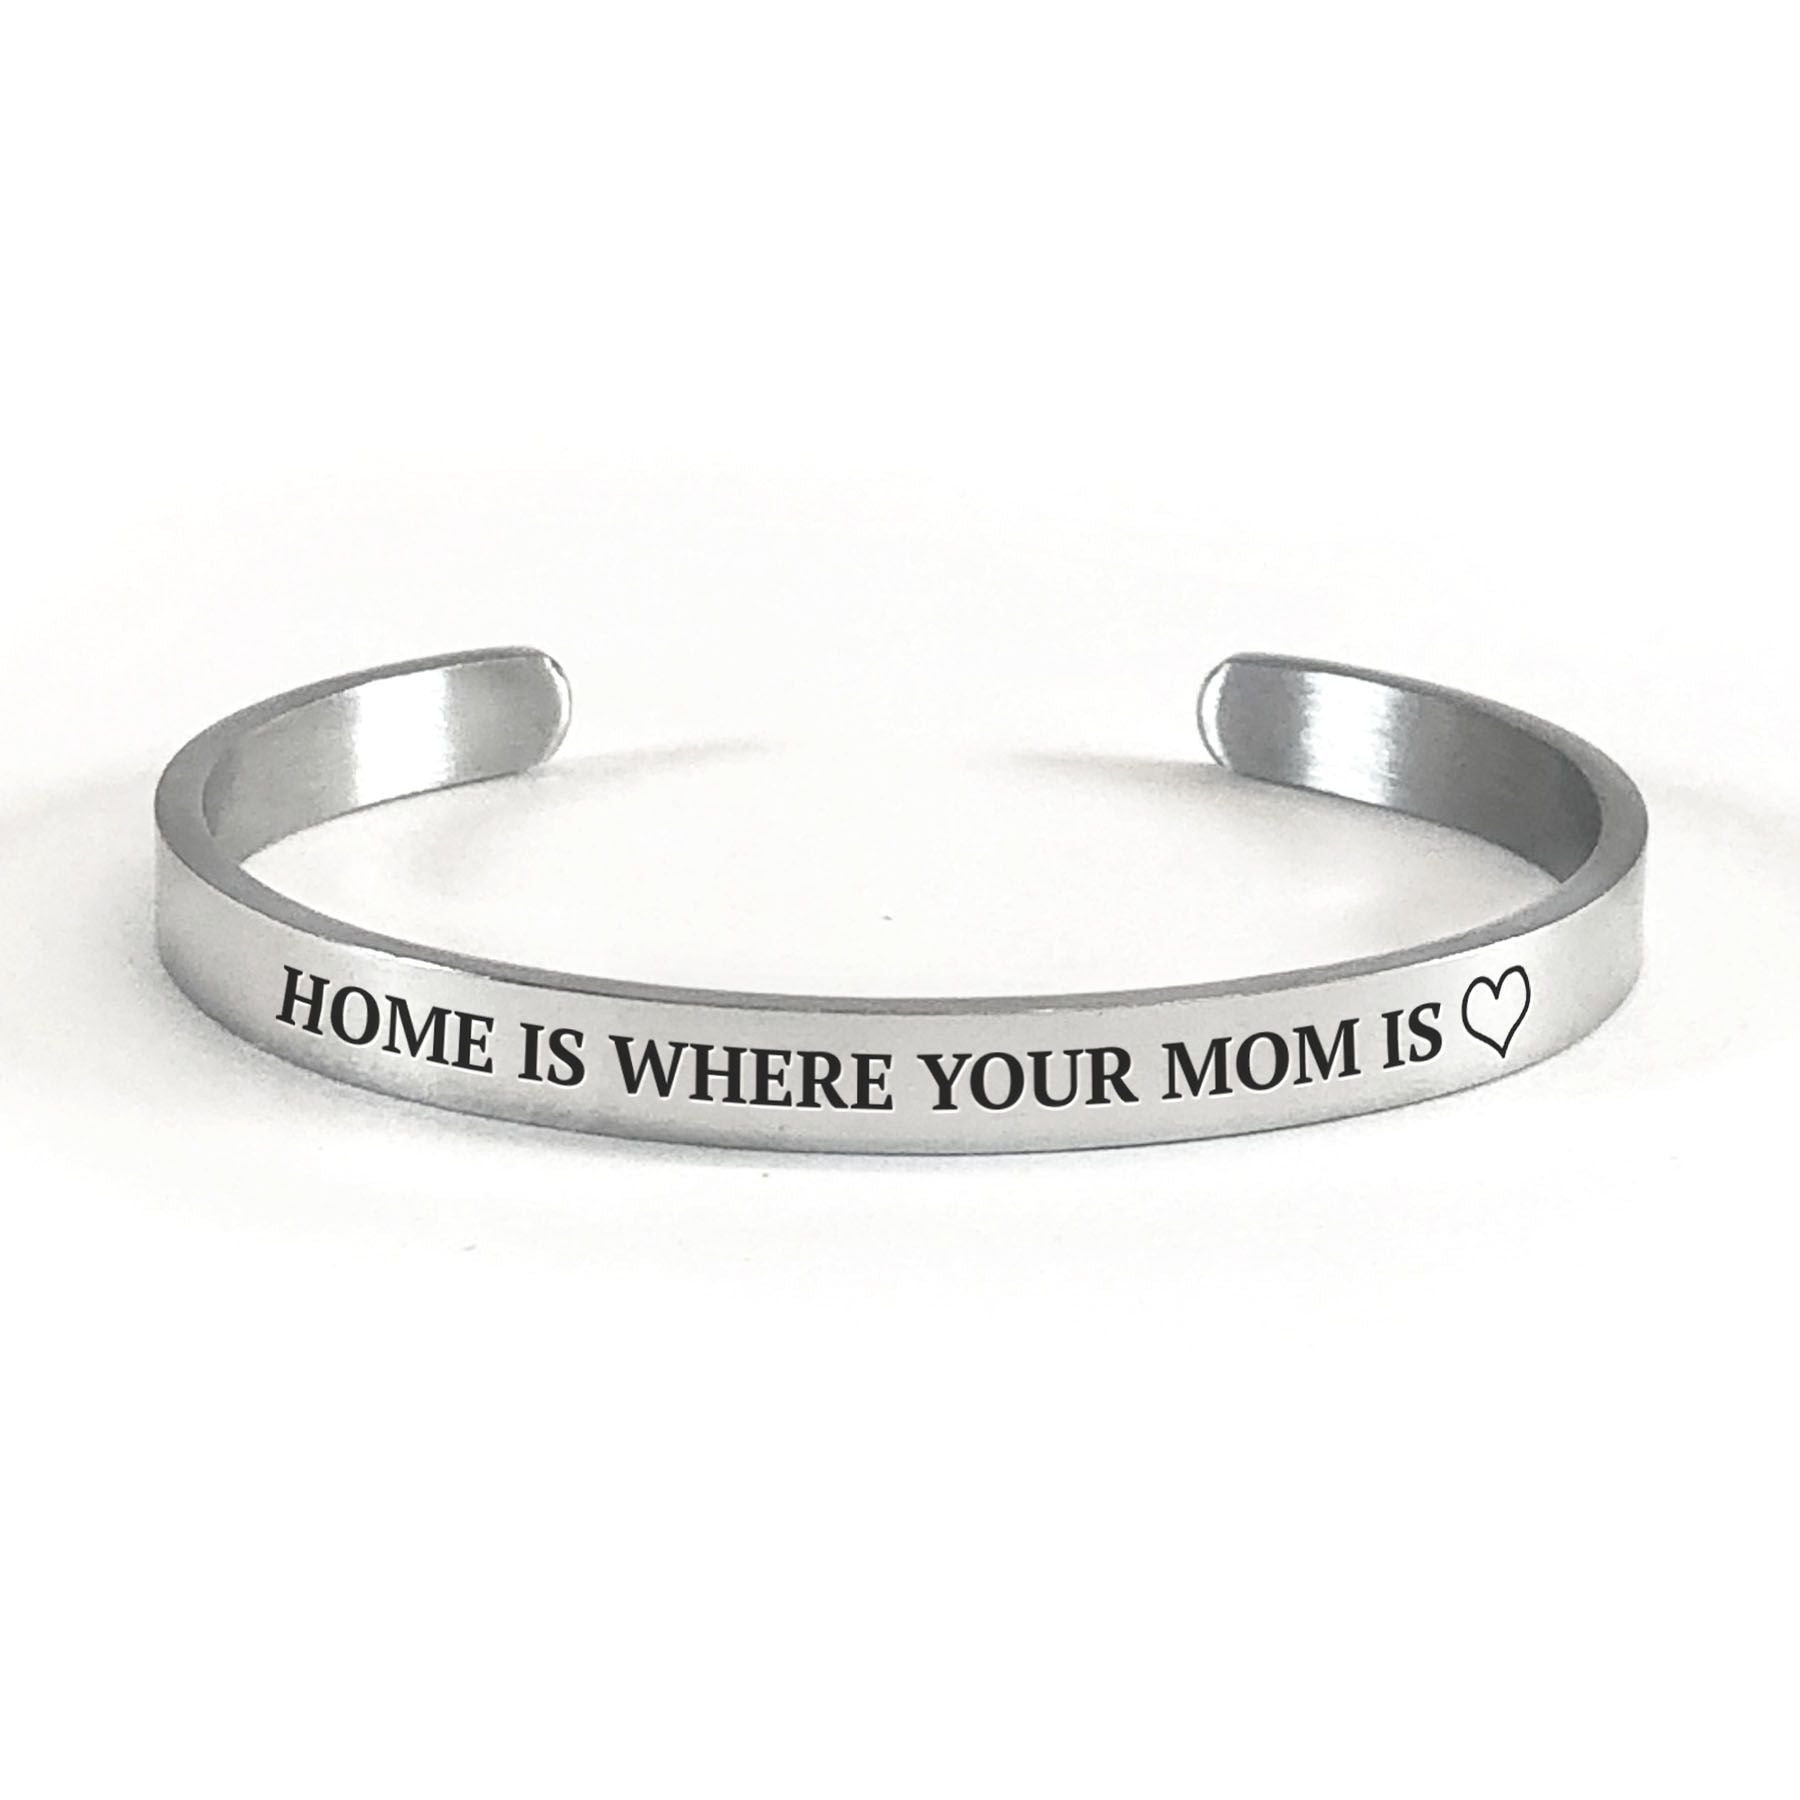 Home is where your mom is bracelet with silver plating